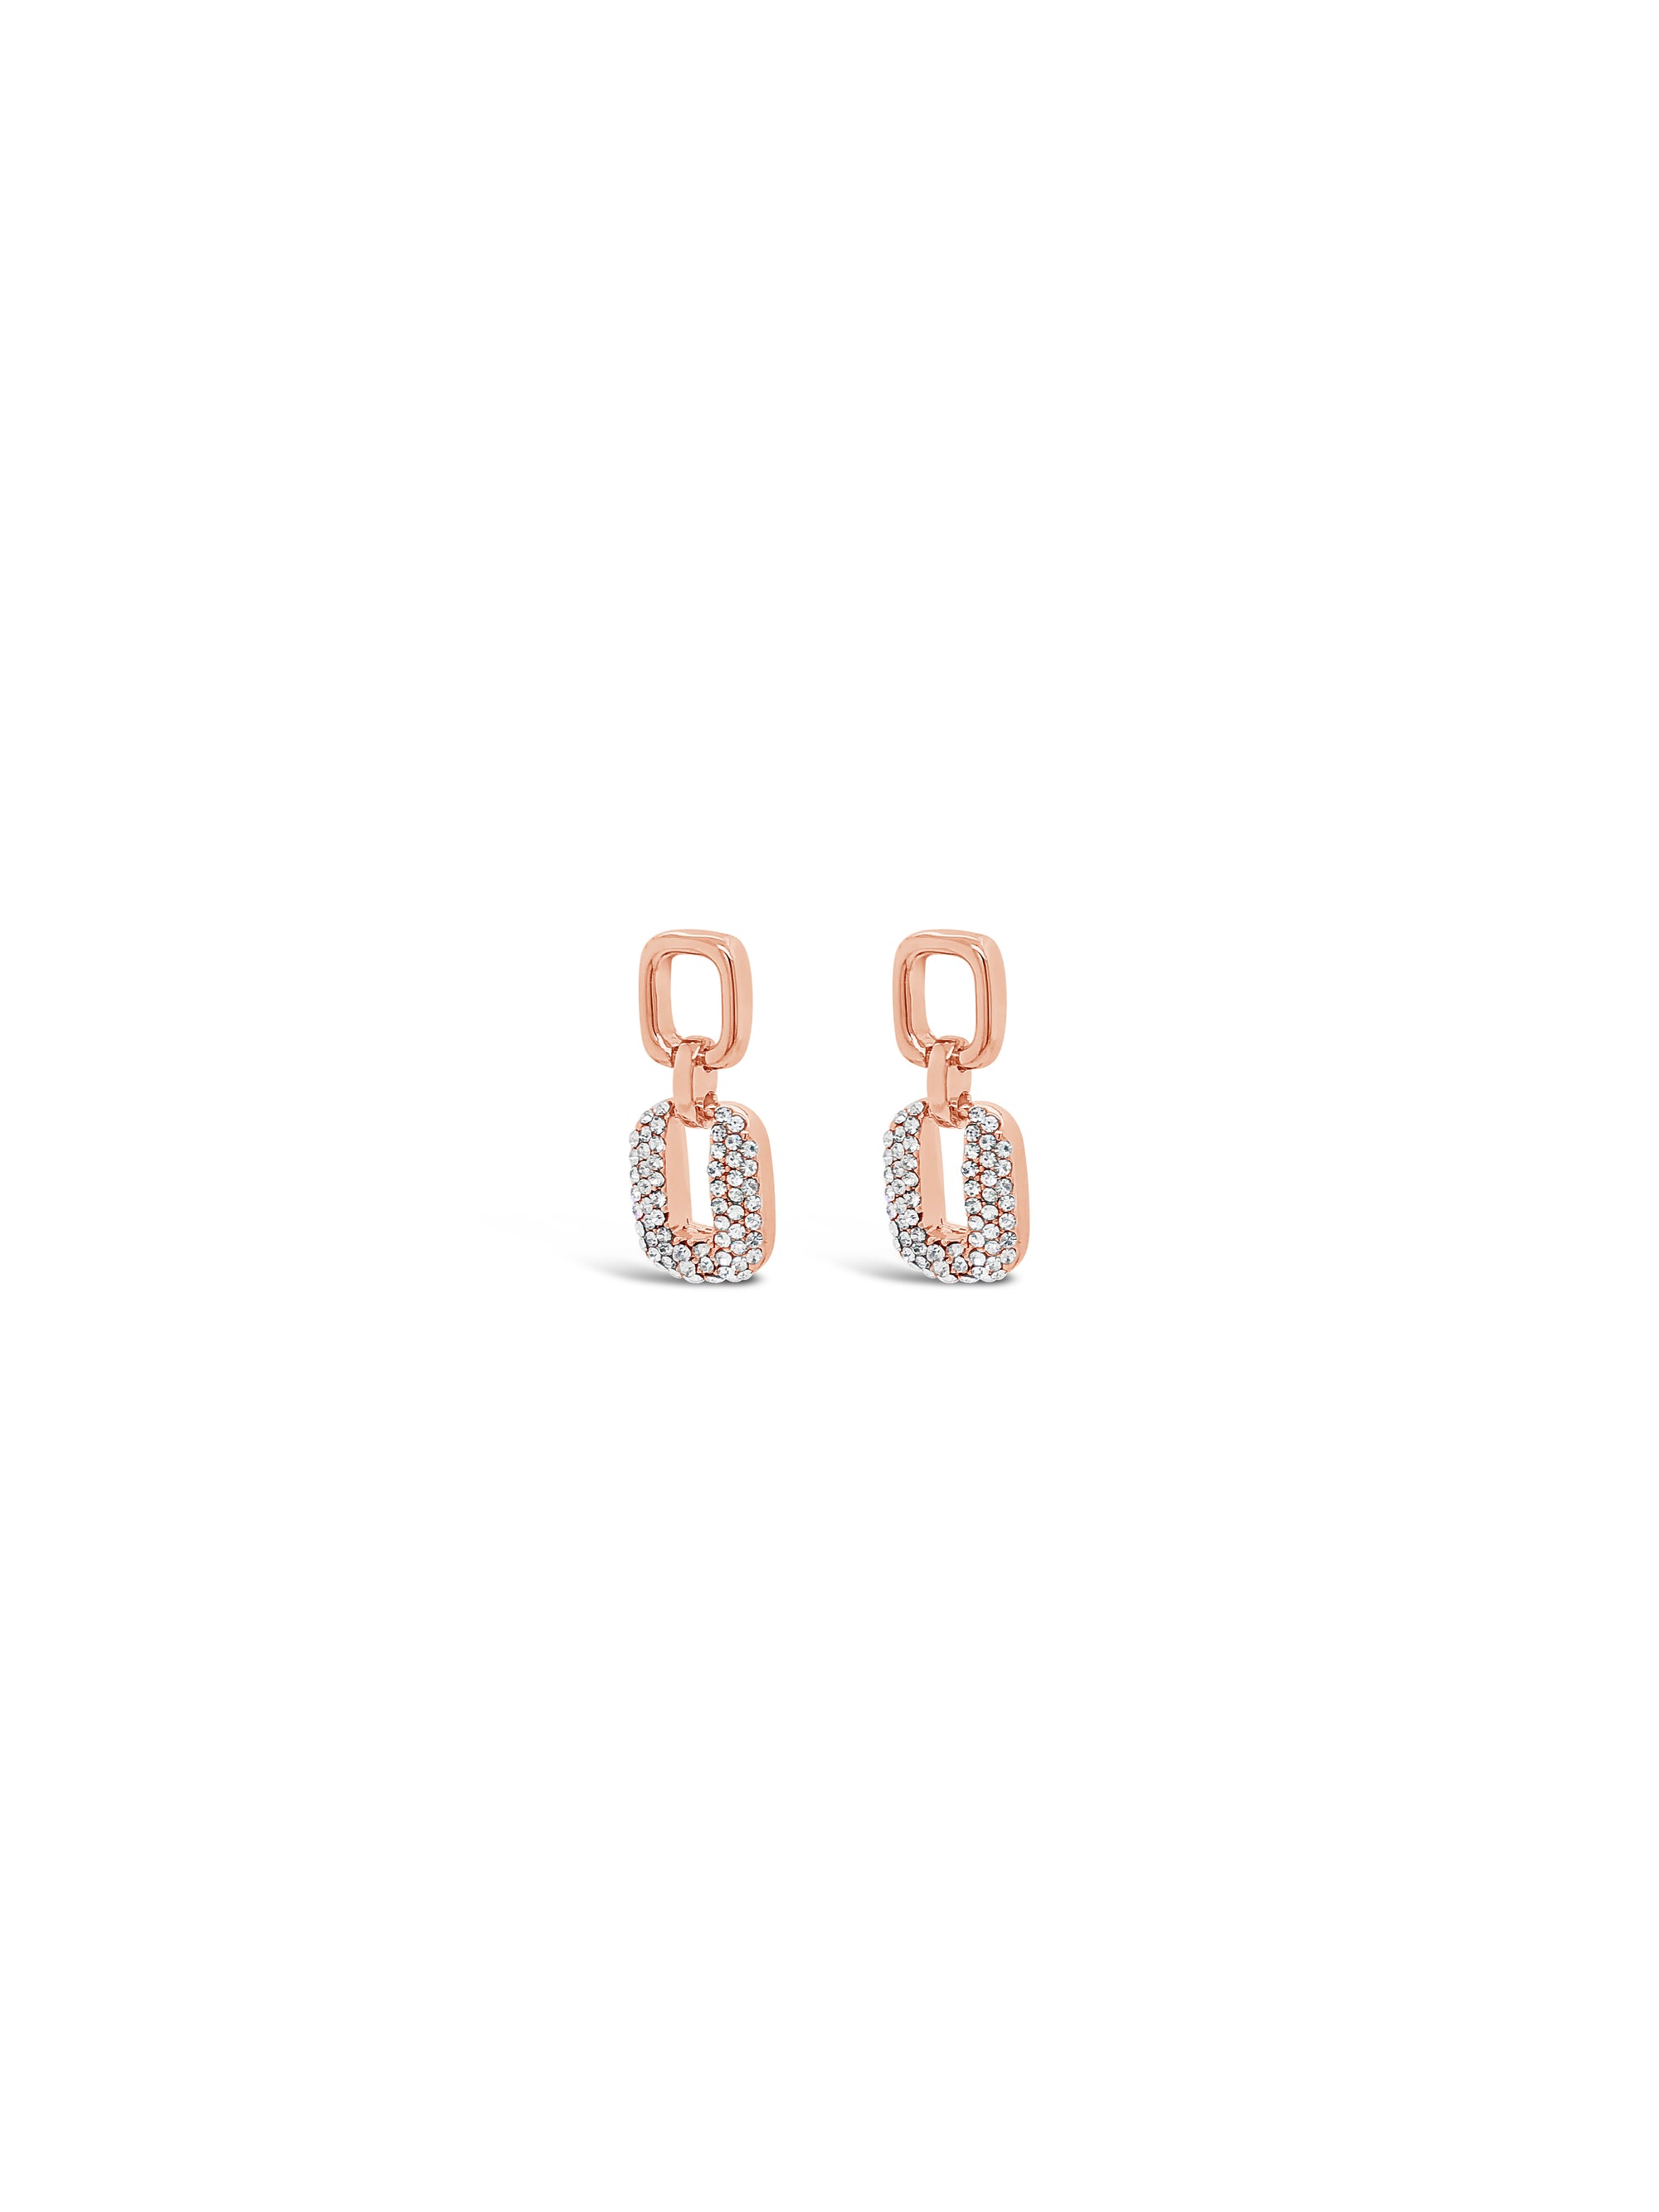 Absolute Jewellery Earring Rose Gold